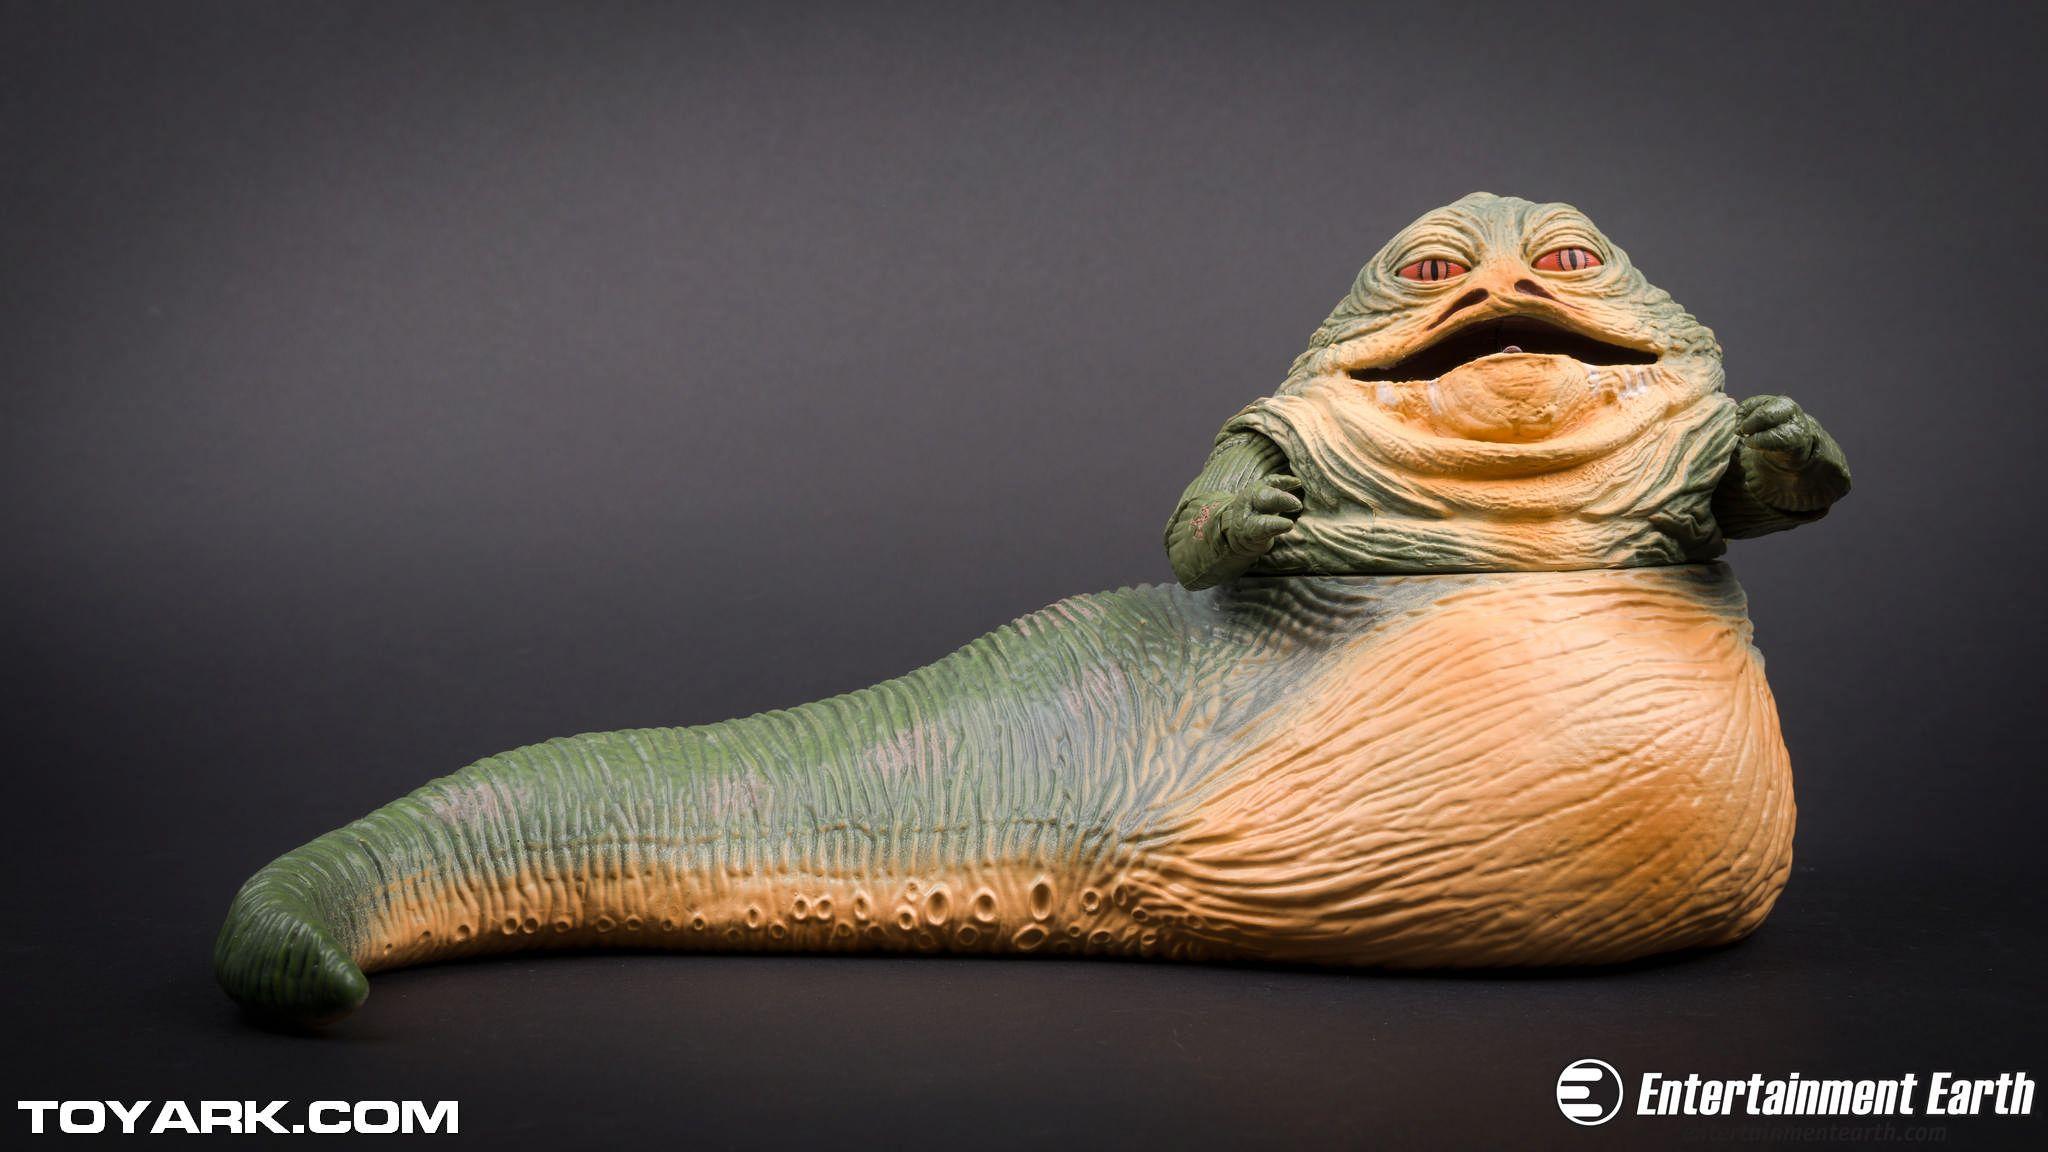 Star Wars Black Series Deluxe Jabba The Hutt Gallery